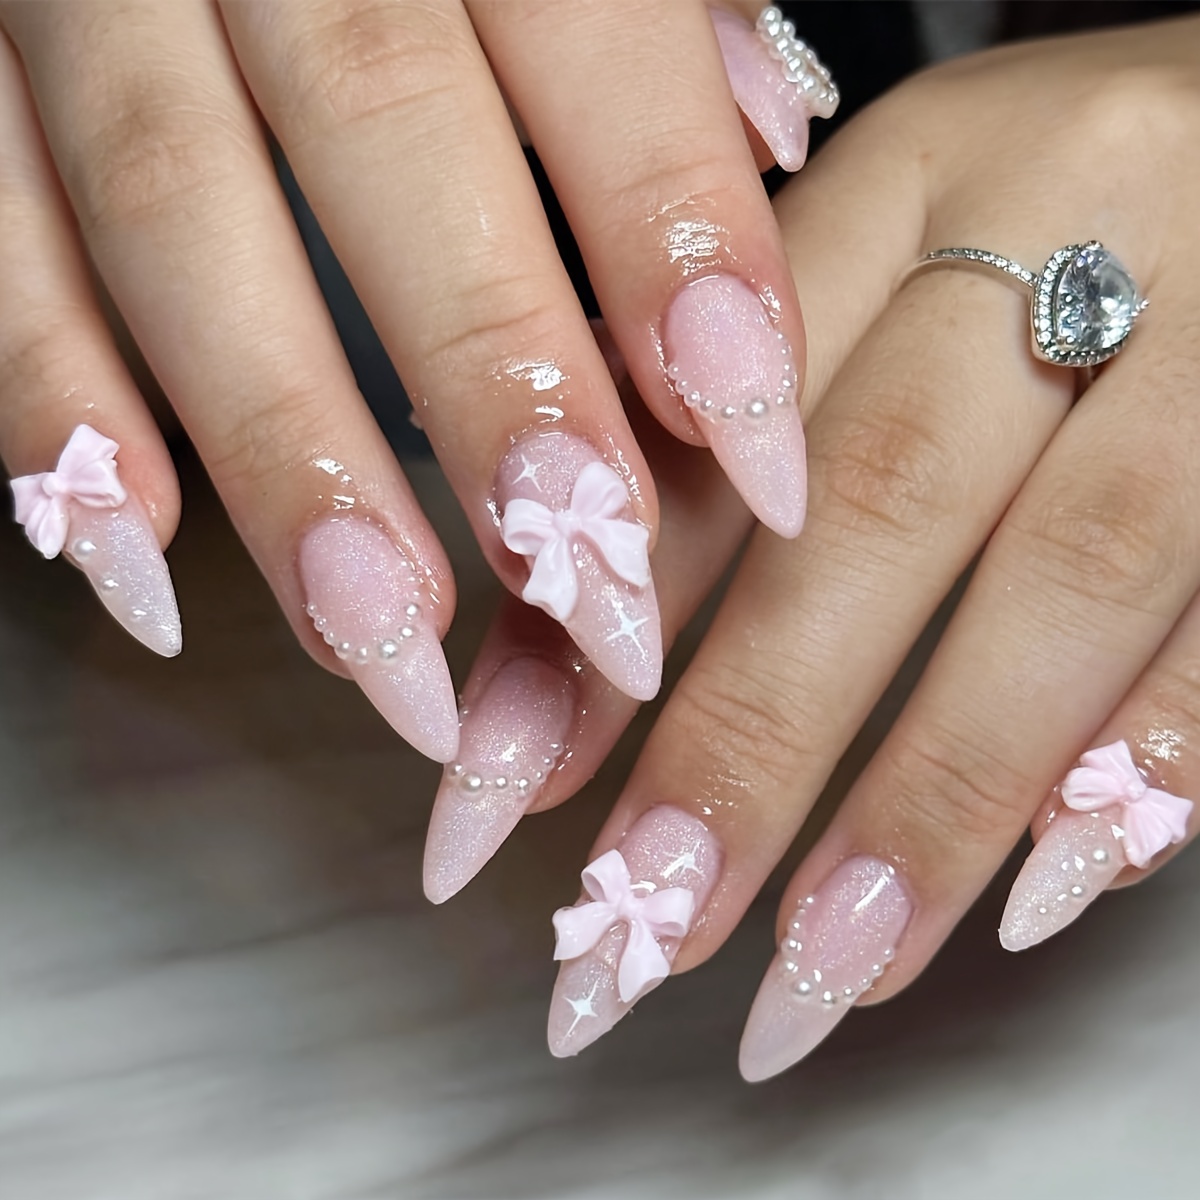 

24-piece Pink Glitter Almond Shaped Long Nail Tips With Glossy Finish, Handmade Pearl And Bow Accents, Fashionable Nail Art Set With Nail Wear Kit